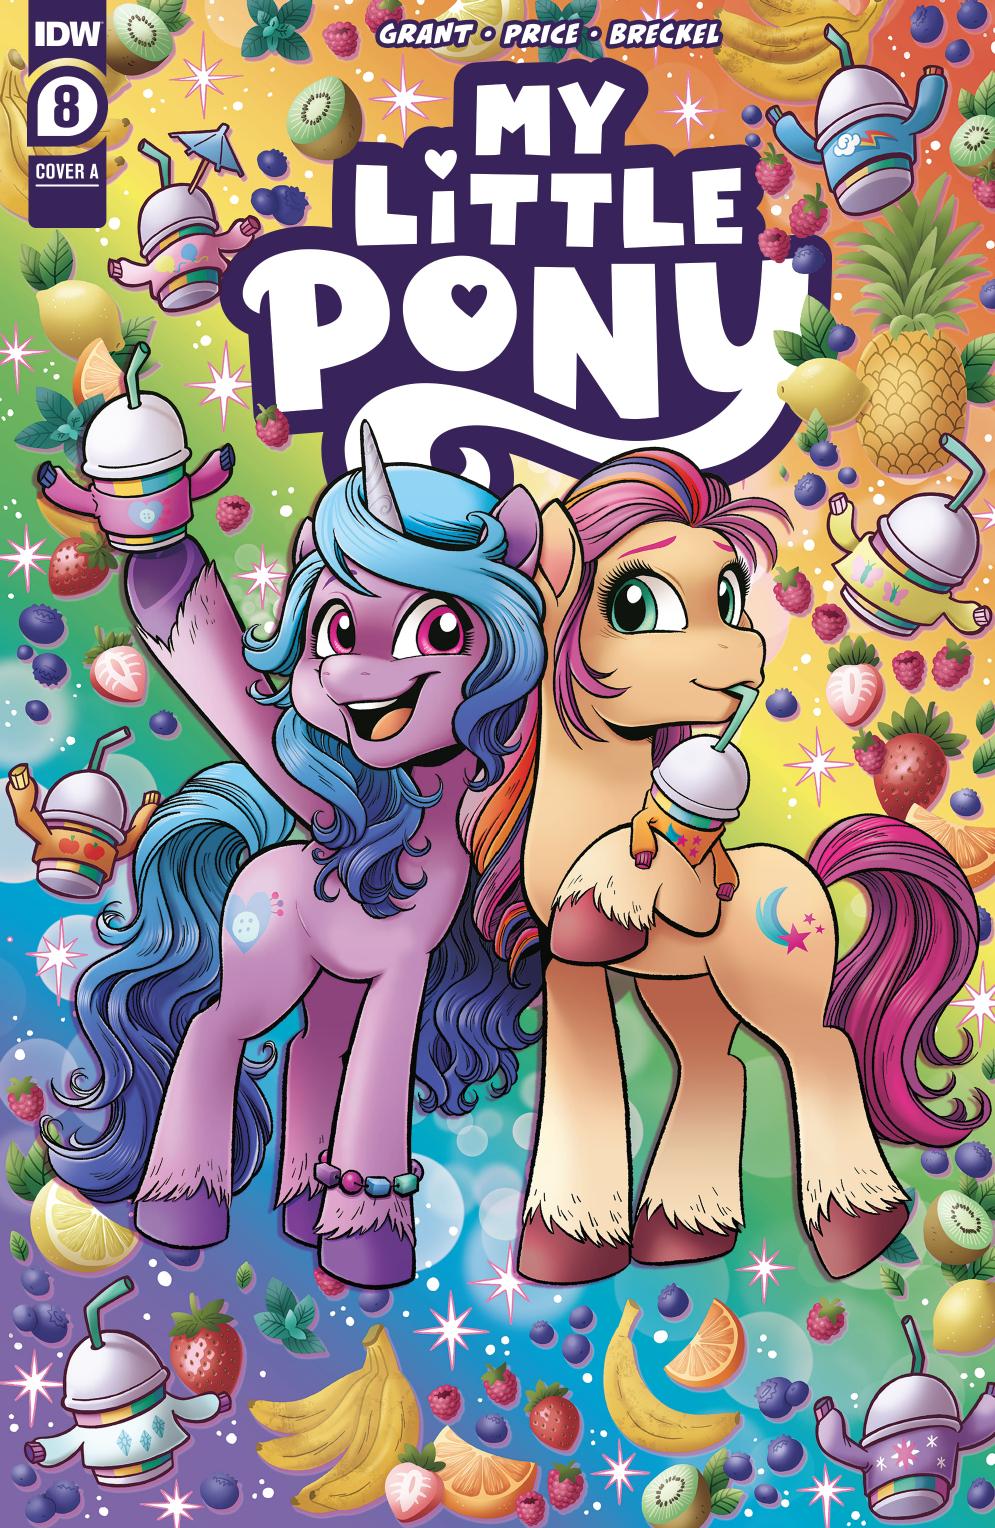 My Little Pony #8 by Andy Price Heather Breckel